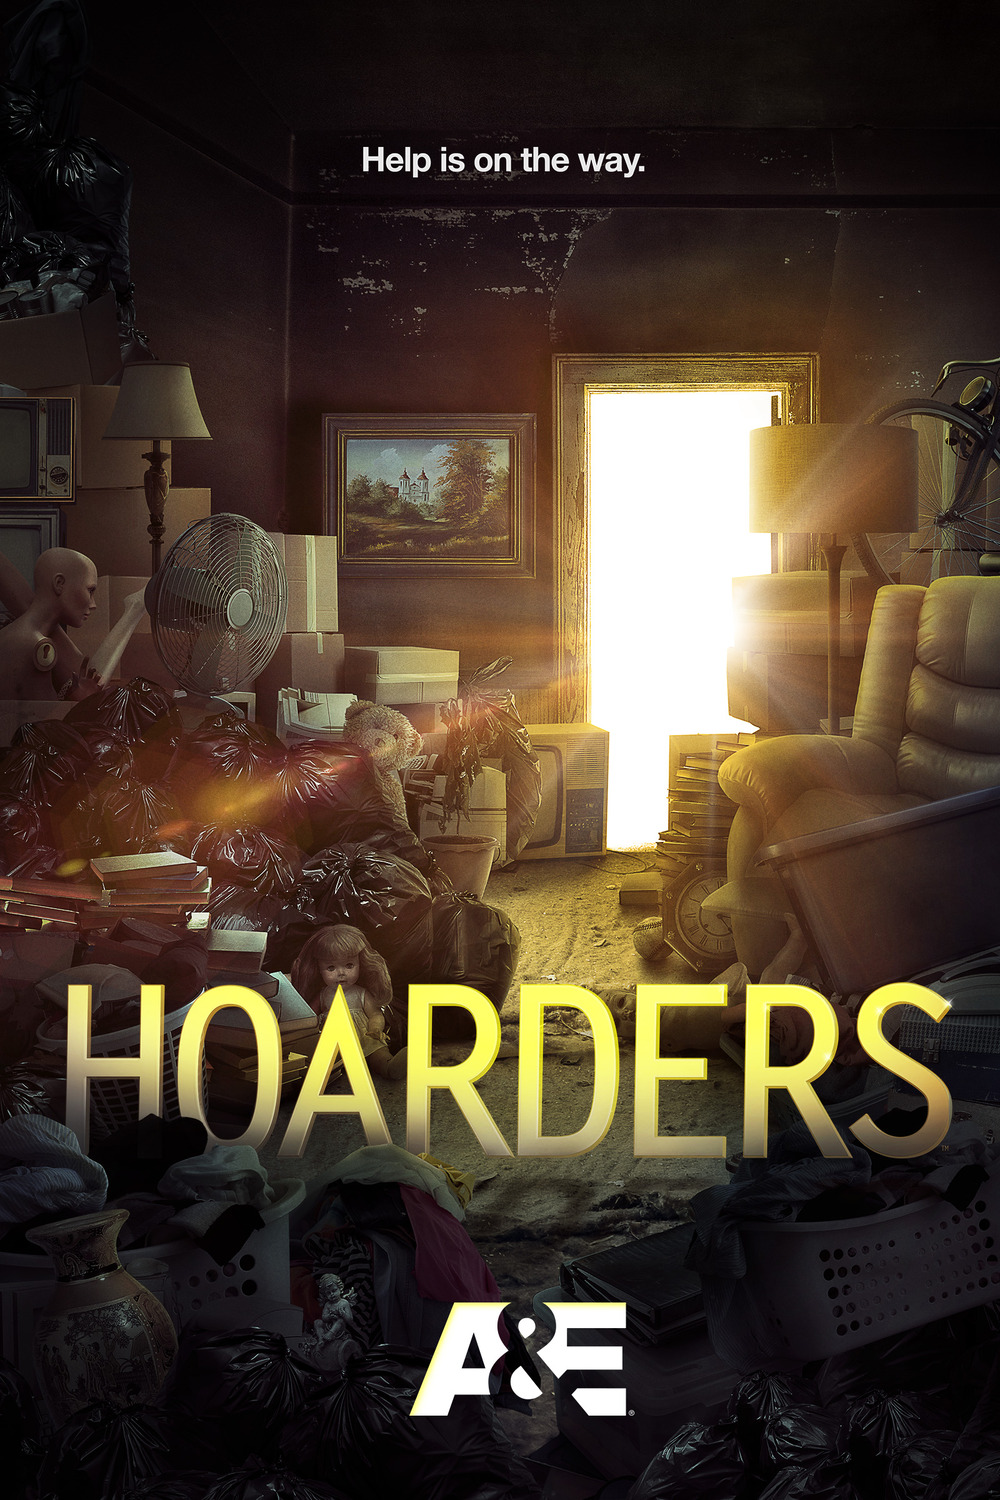 Extra Large TV Poster Image for Hoarders (#5 of 6)